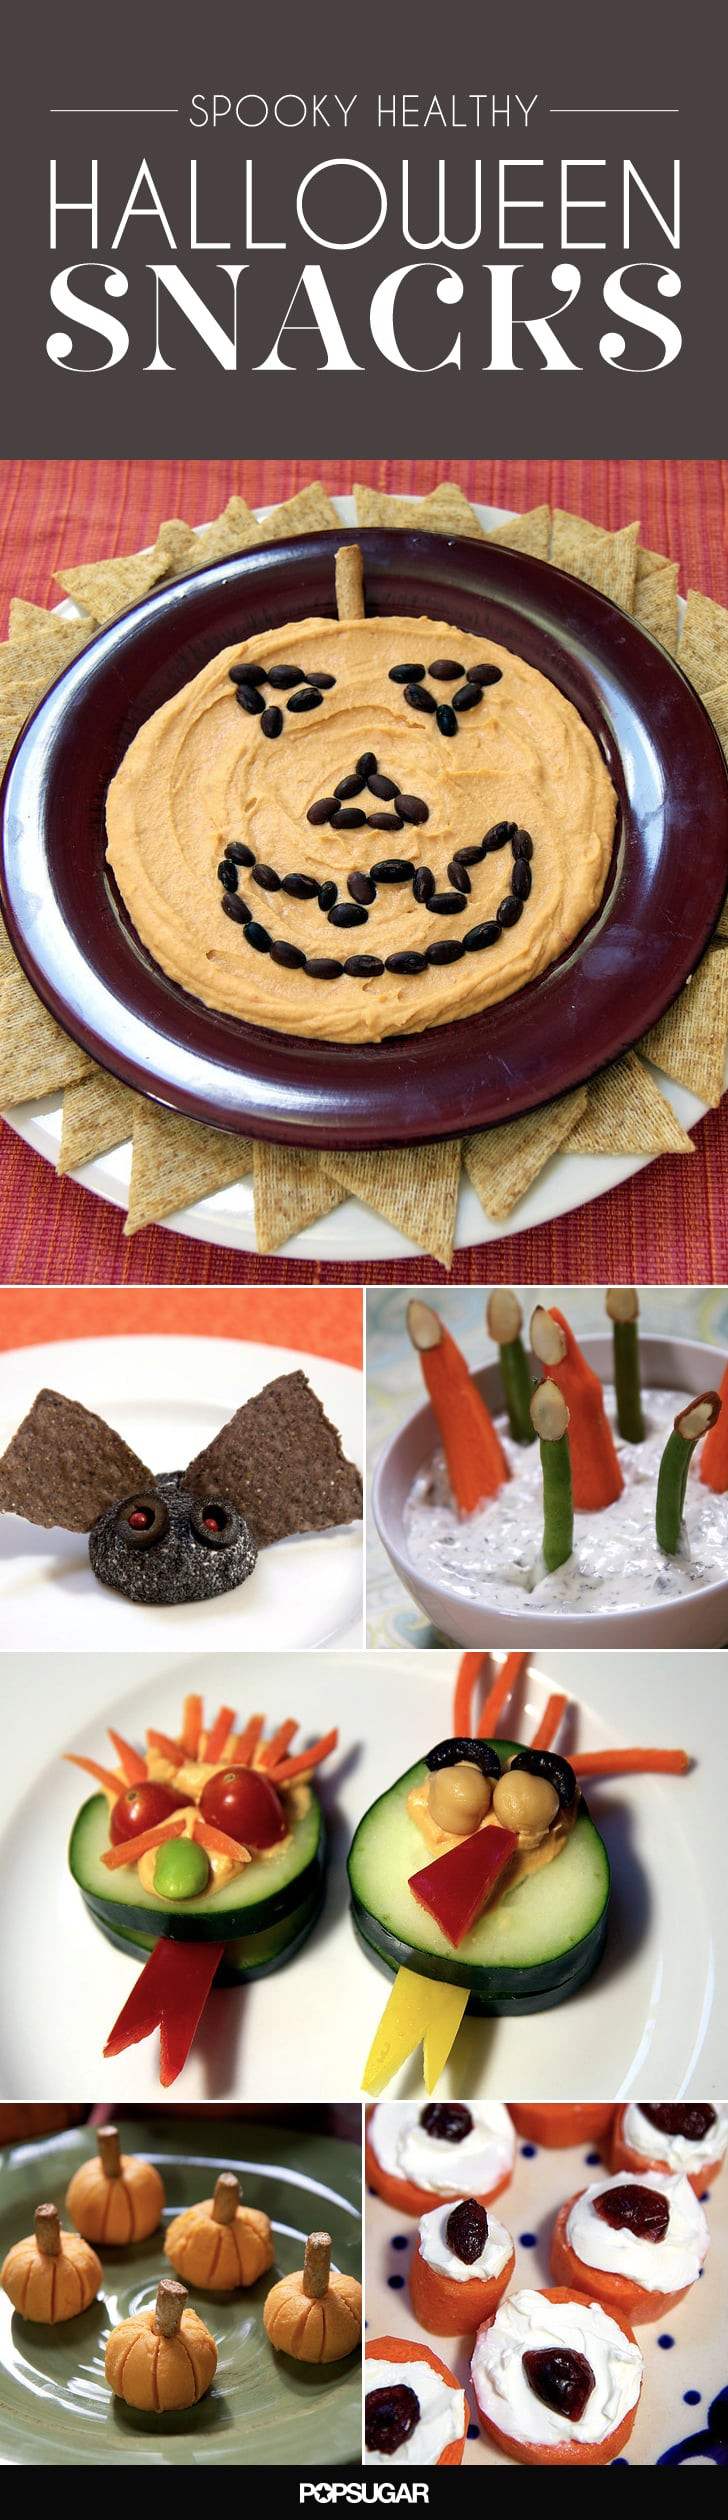 Healthy Halloween Appetizers
 Fitness Health & Well Being